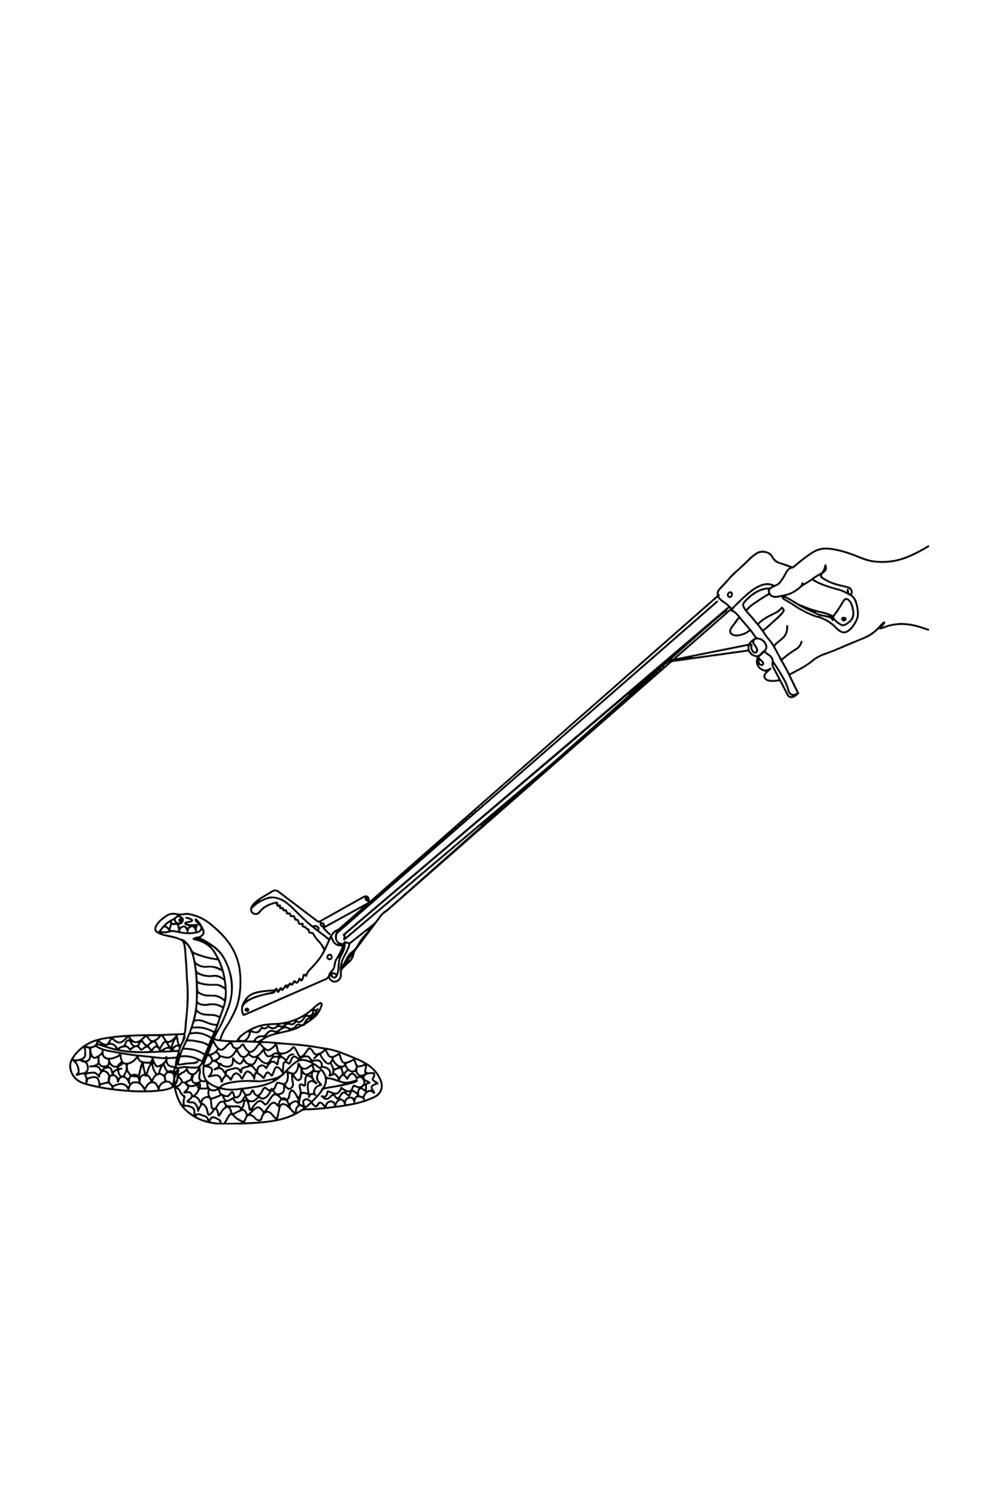 Cartoon Illustration: Continuous Sketch Snake Catcher Tools, Reptile Handling Tools : Cartoon Snake Catcher Illustration, Snake Catcher Equipment: Pliers, Tongs, Stick Cartoon Drawing pinterest preview image.